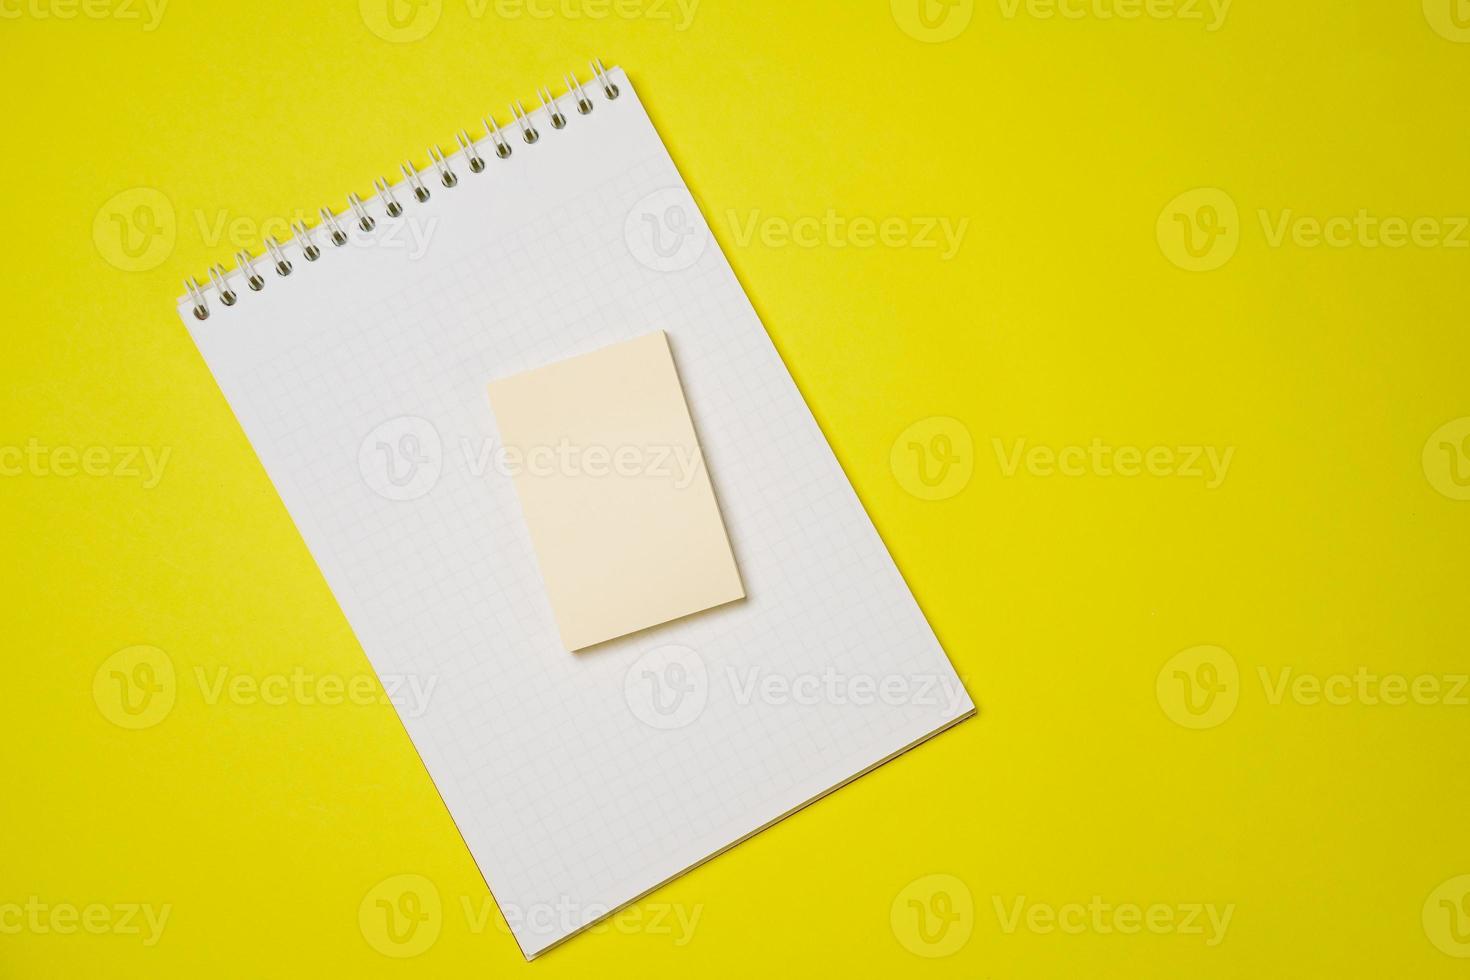 Open blank white notepad on a spiral and stickers on a yellow background. photo